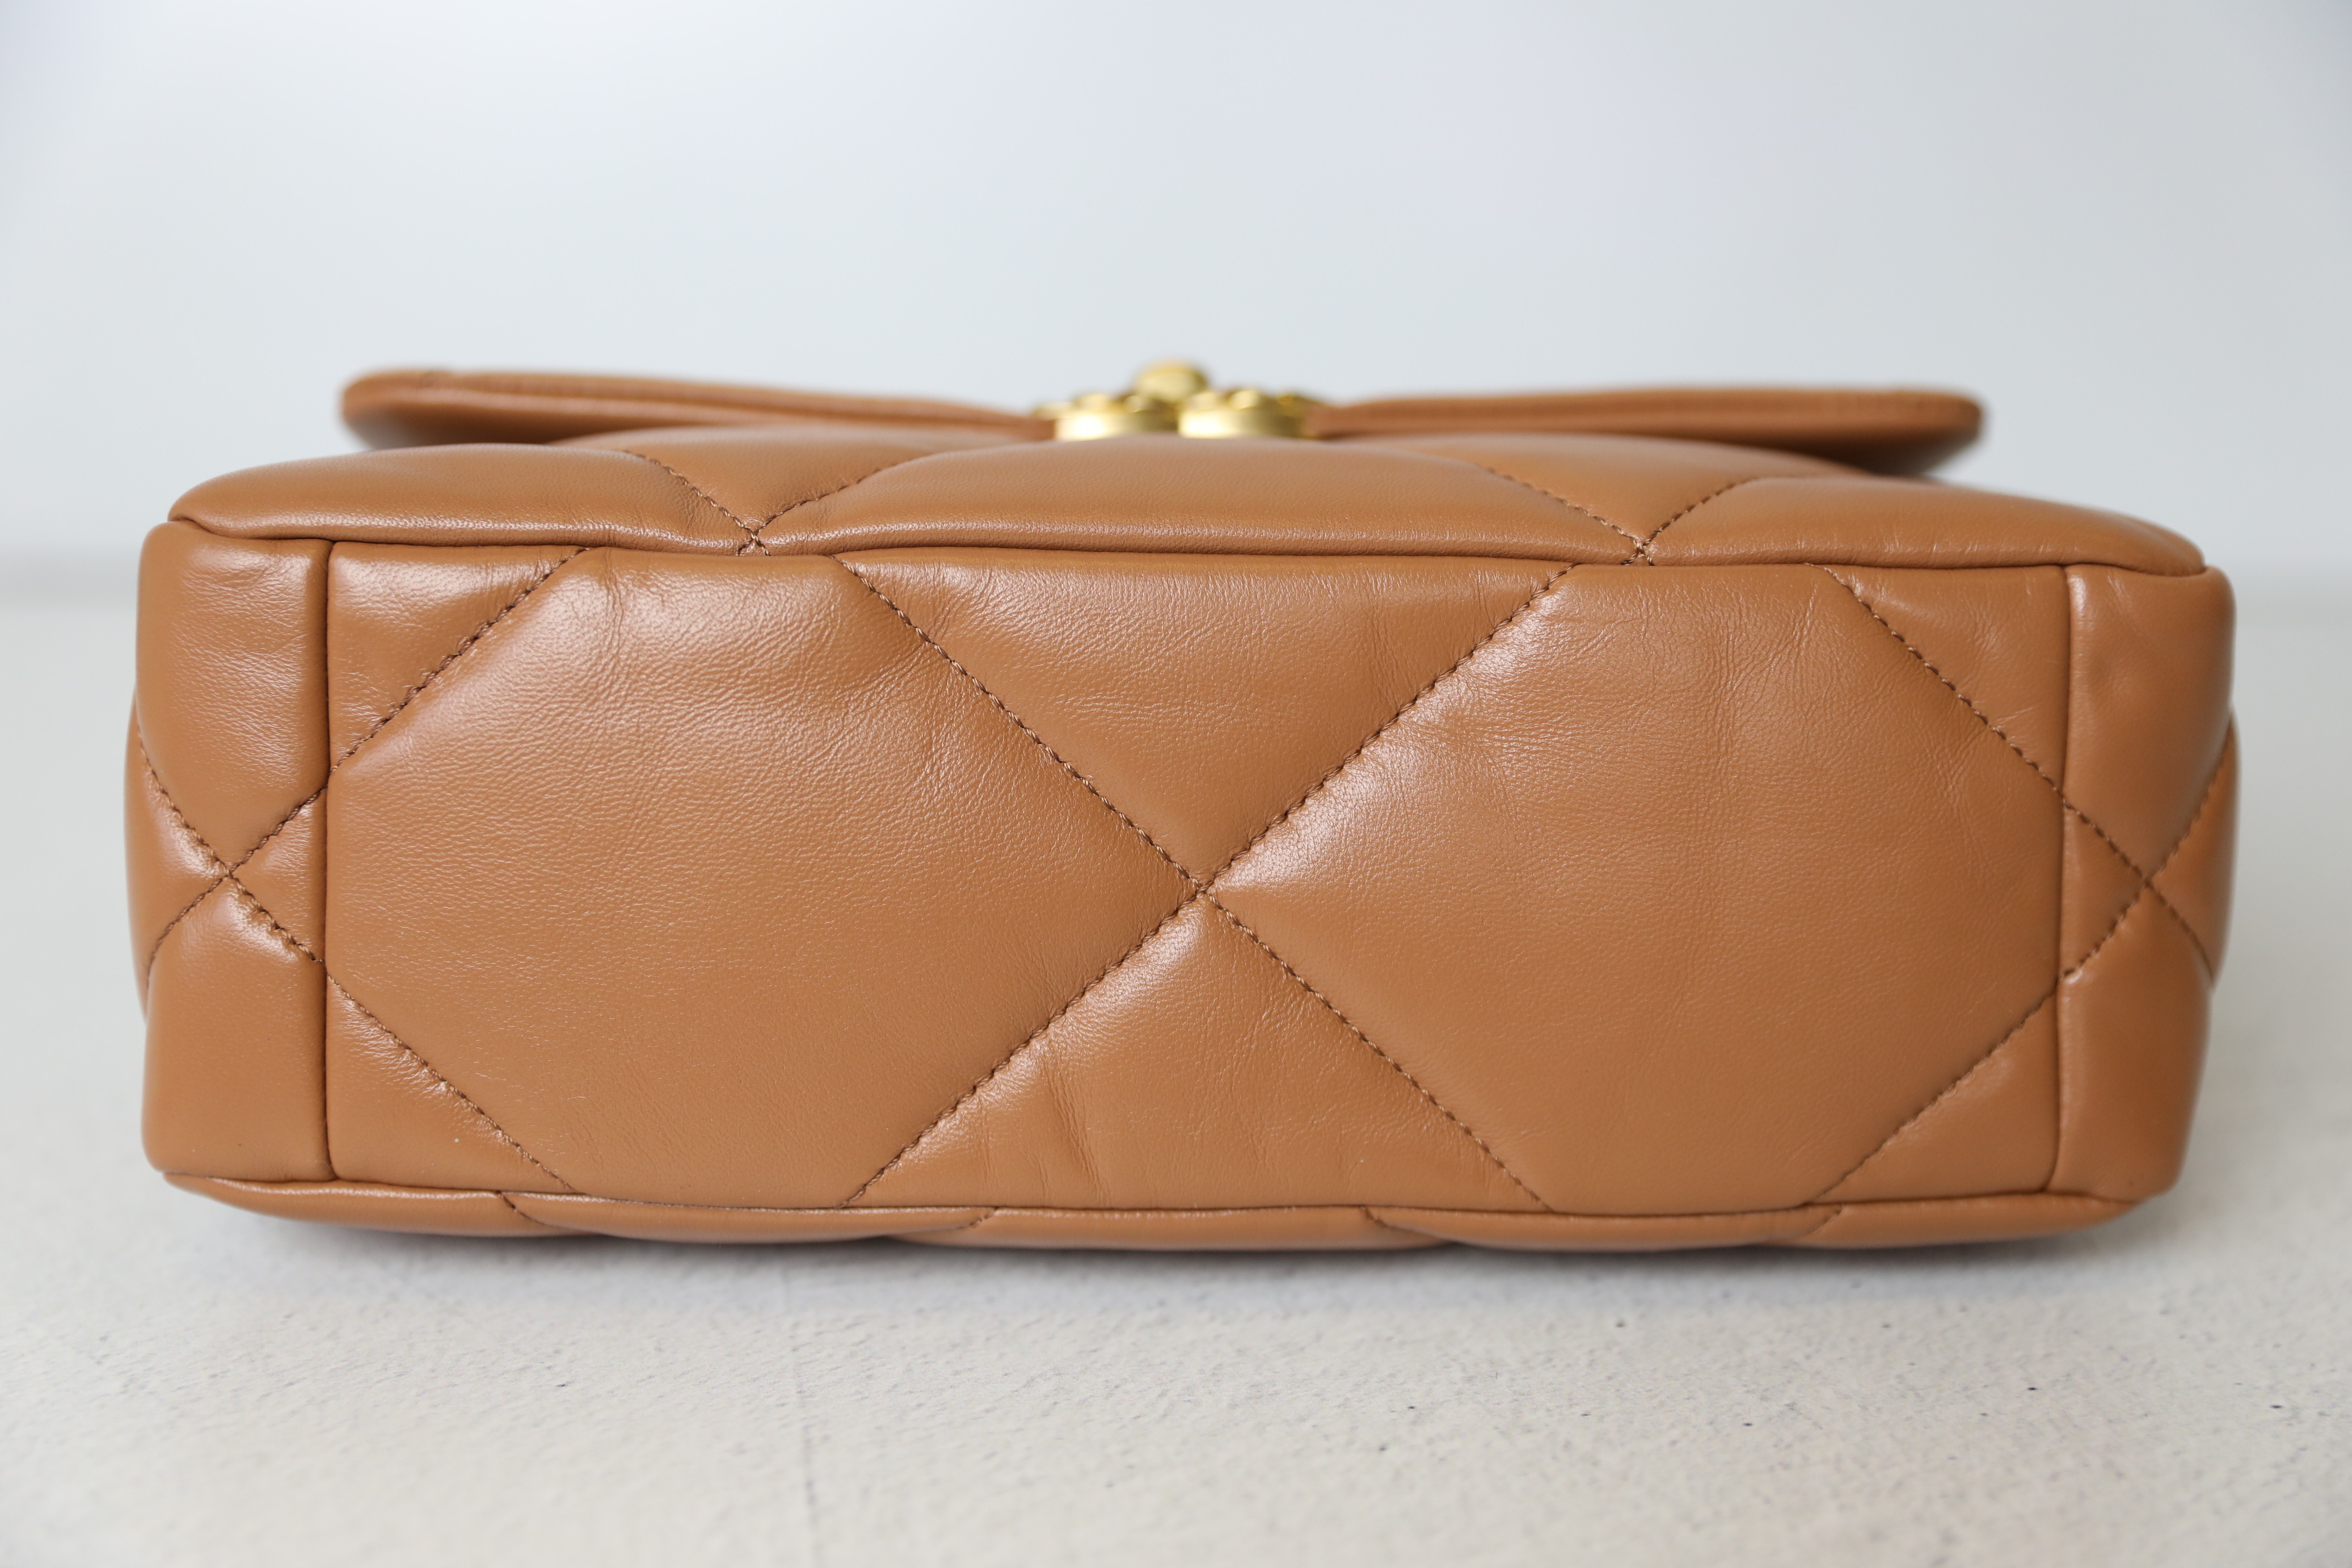 Chanel 19 Small Caramel Leather, Mixed Metal Hardware, New in Box